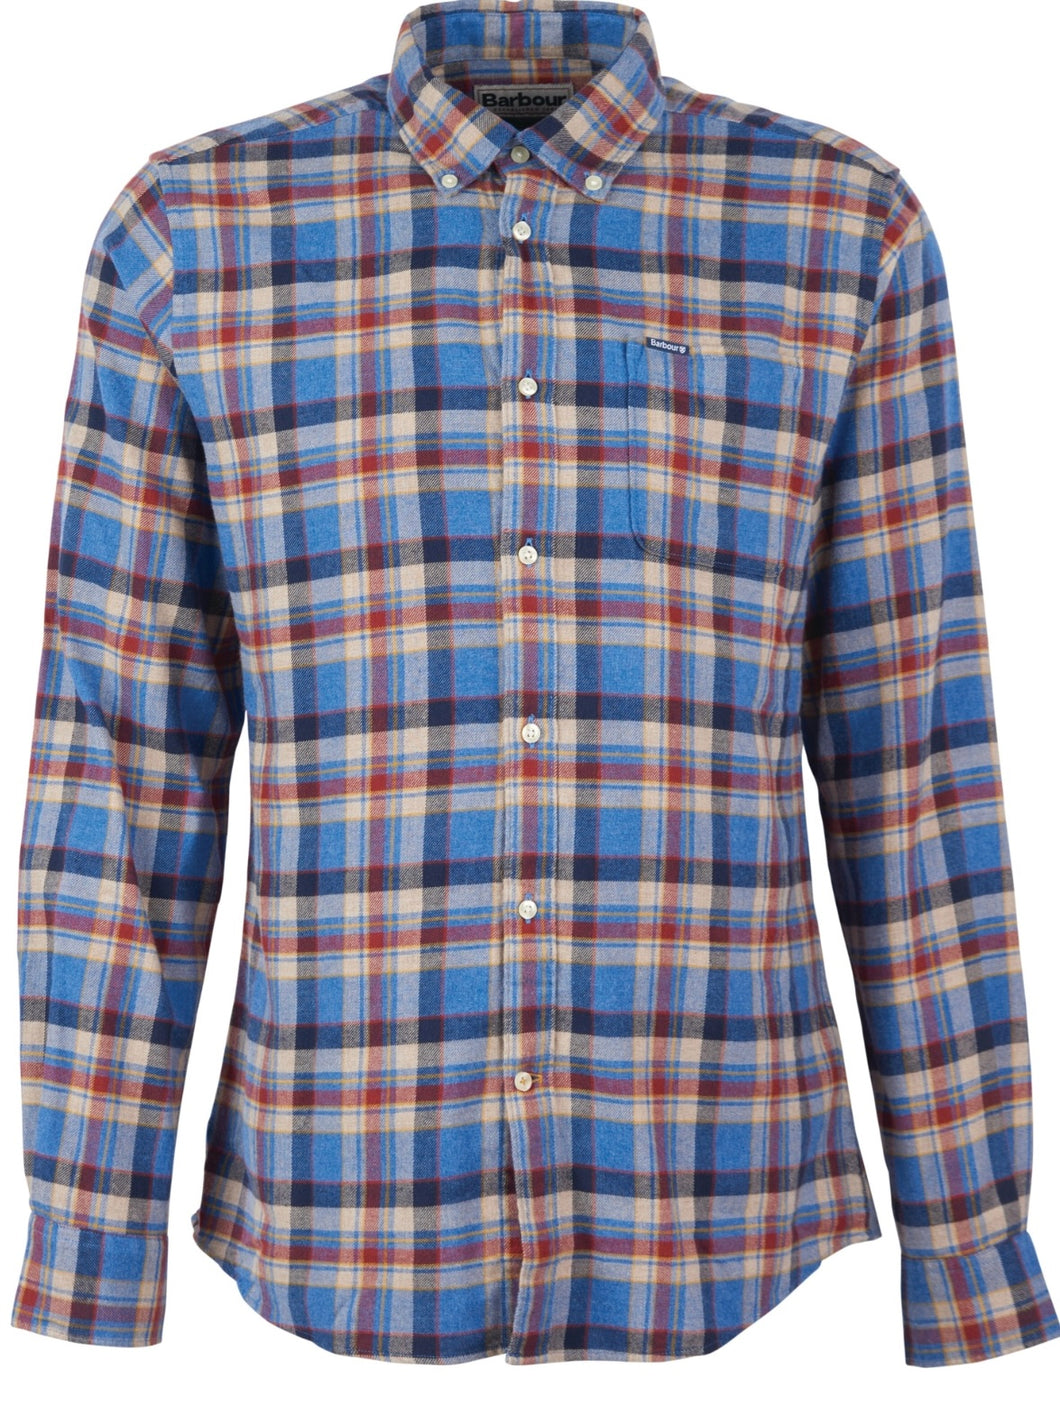 Barbour Mens Hollystone tailored shirt